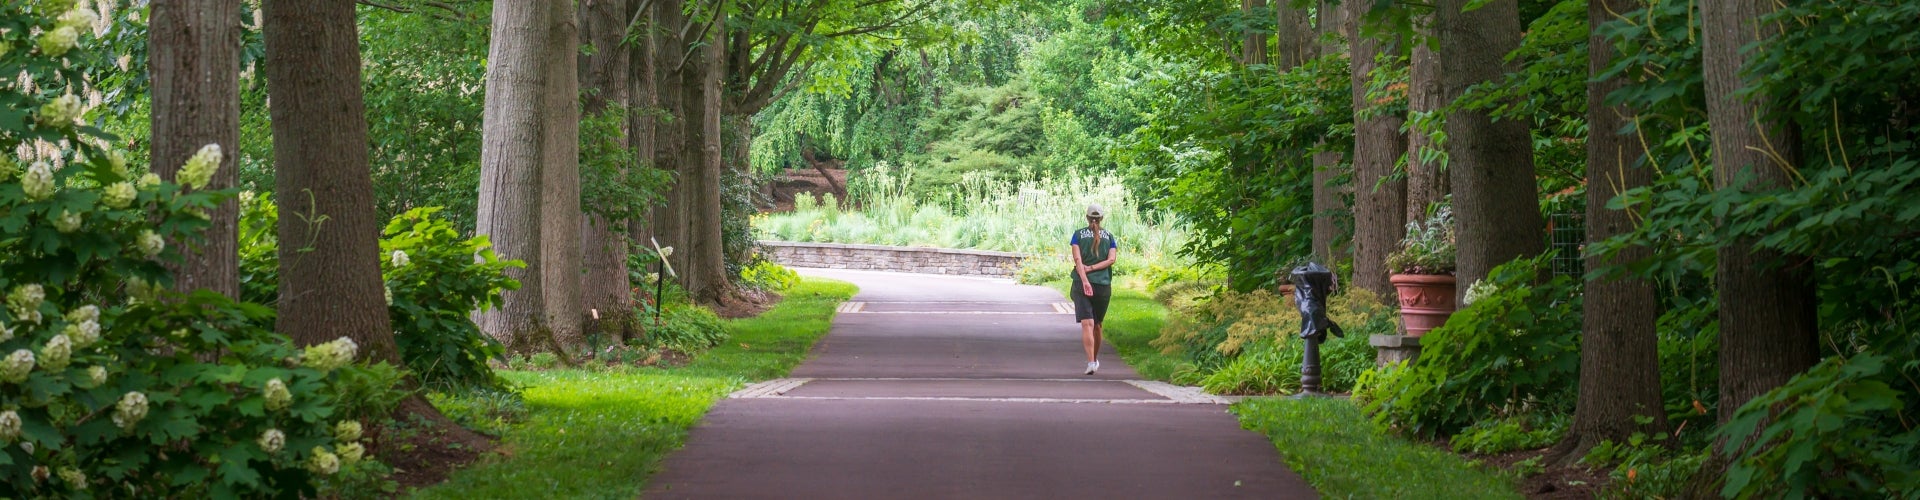 A woman walks along a paved path lined with green summer trees and planters.